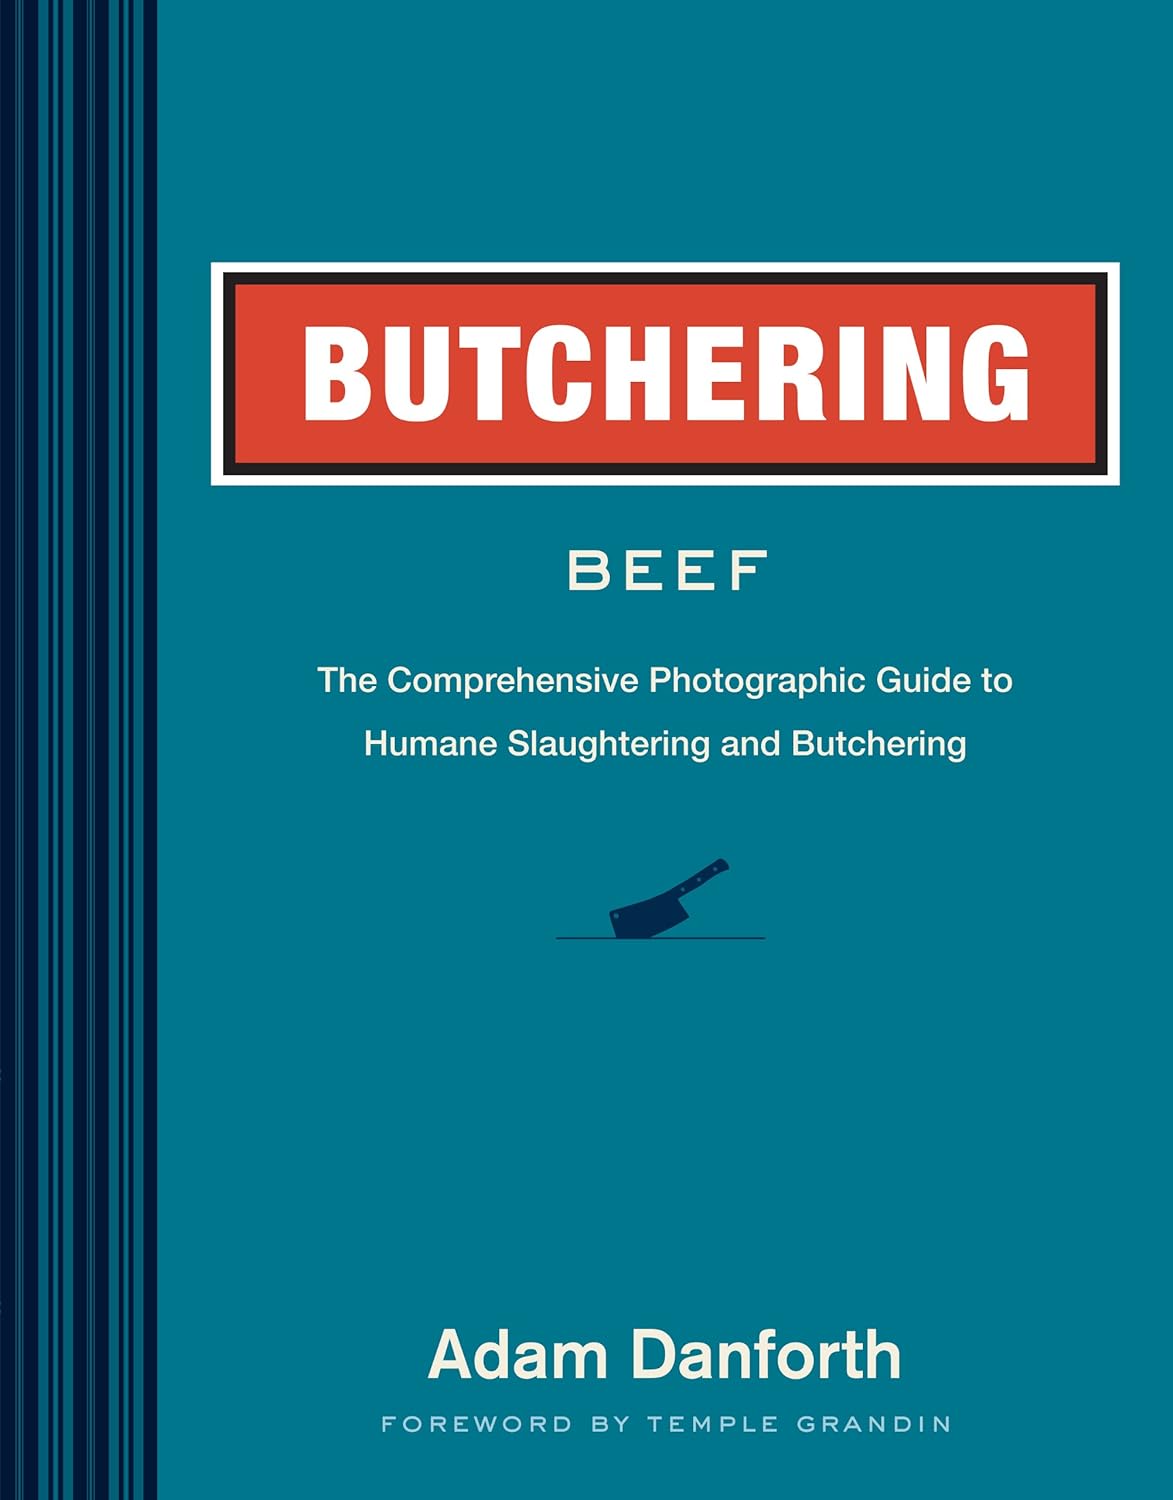 Butchering Beef: The Comprehensive Photographic Guide to Humane Slaughtering and Butchering Paperback by Adam Danforth